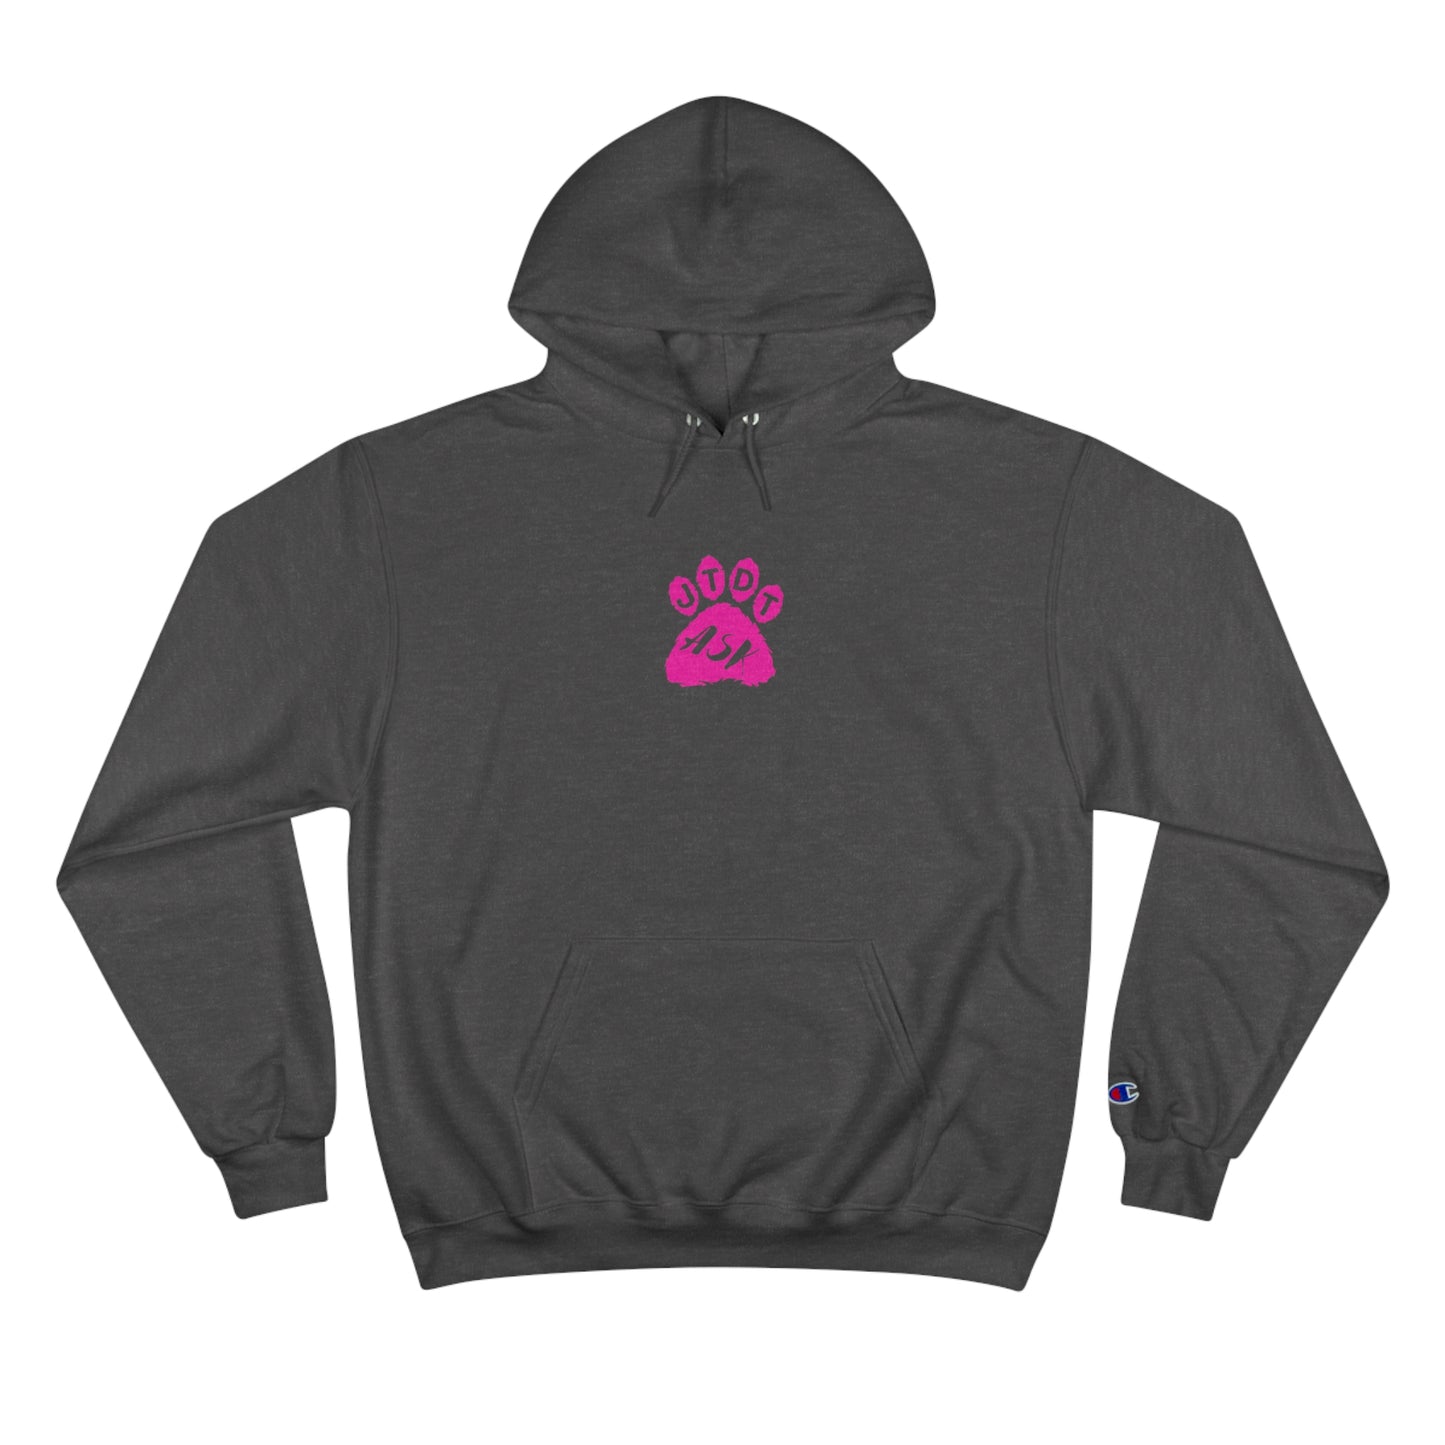 :

Moonstyx Streetwear - "Dog Friendly People Reactive" (Pink Ask JTDT) Pitbull Edition - Unisex Tee